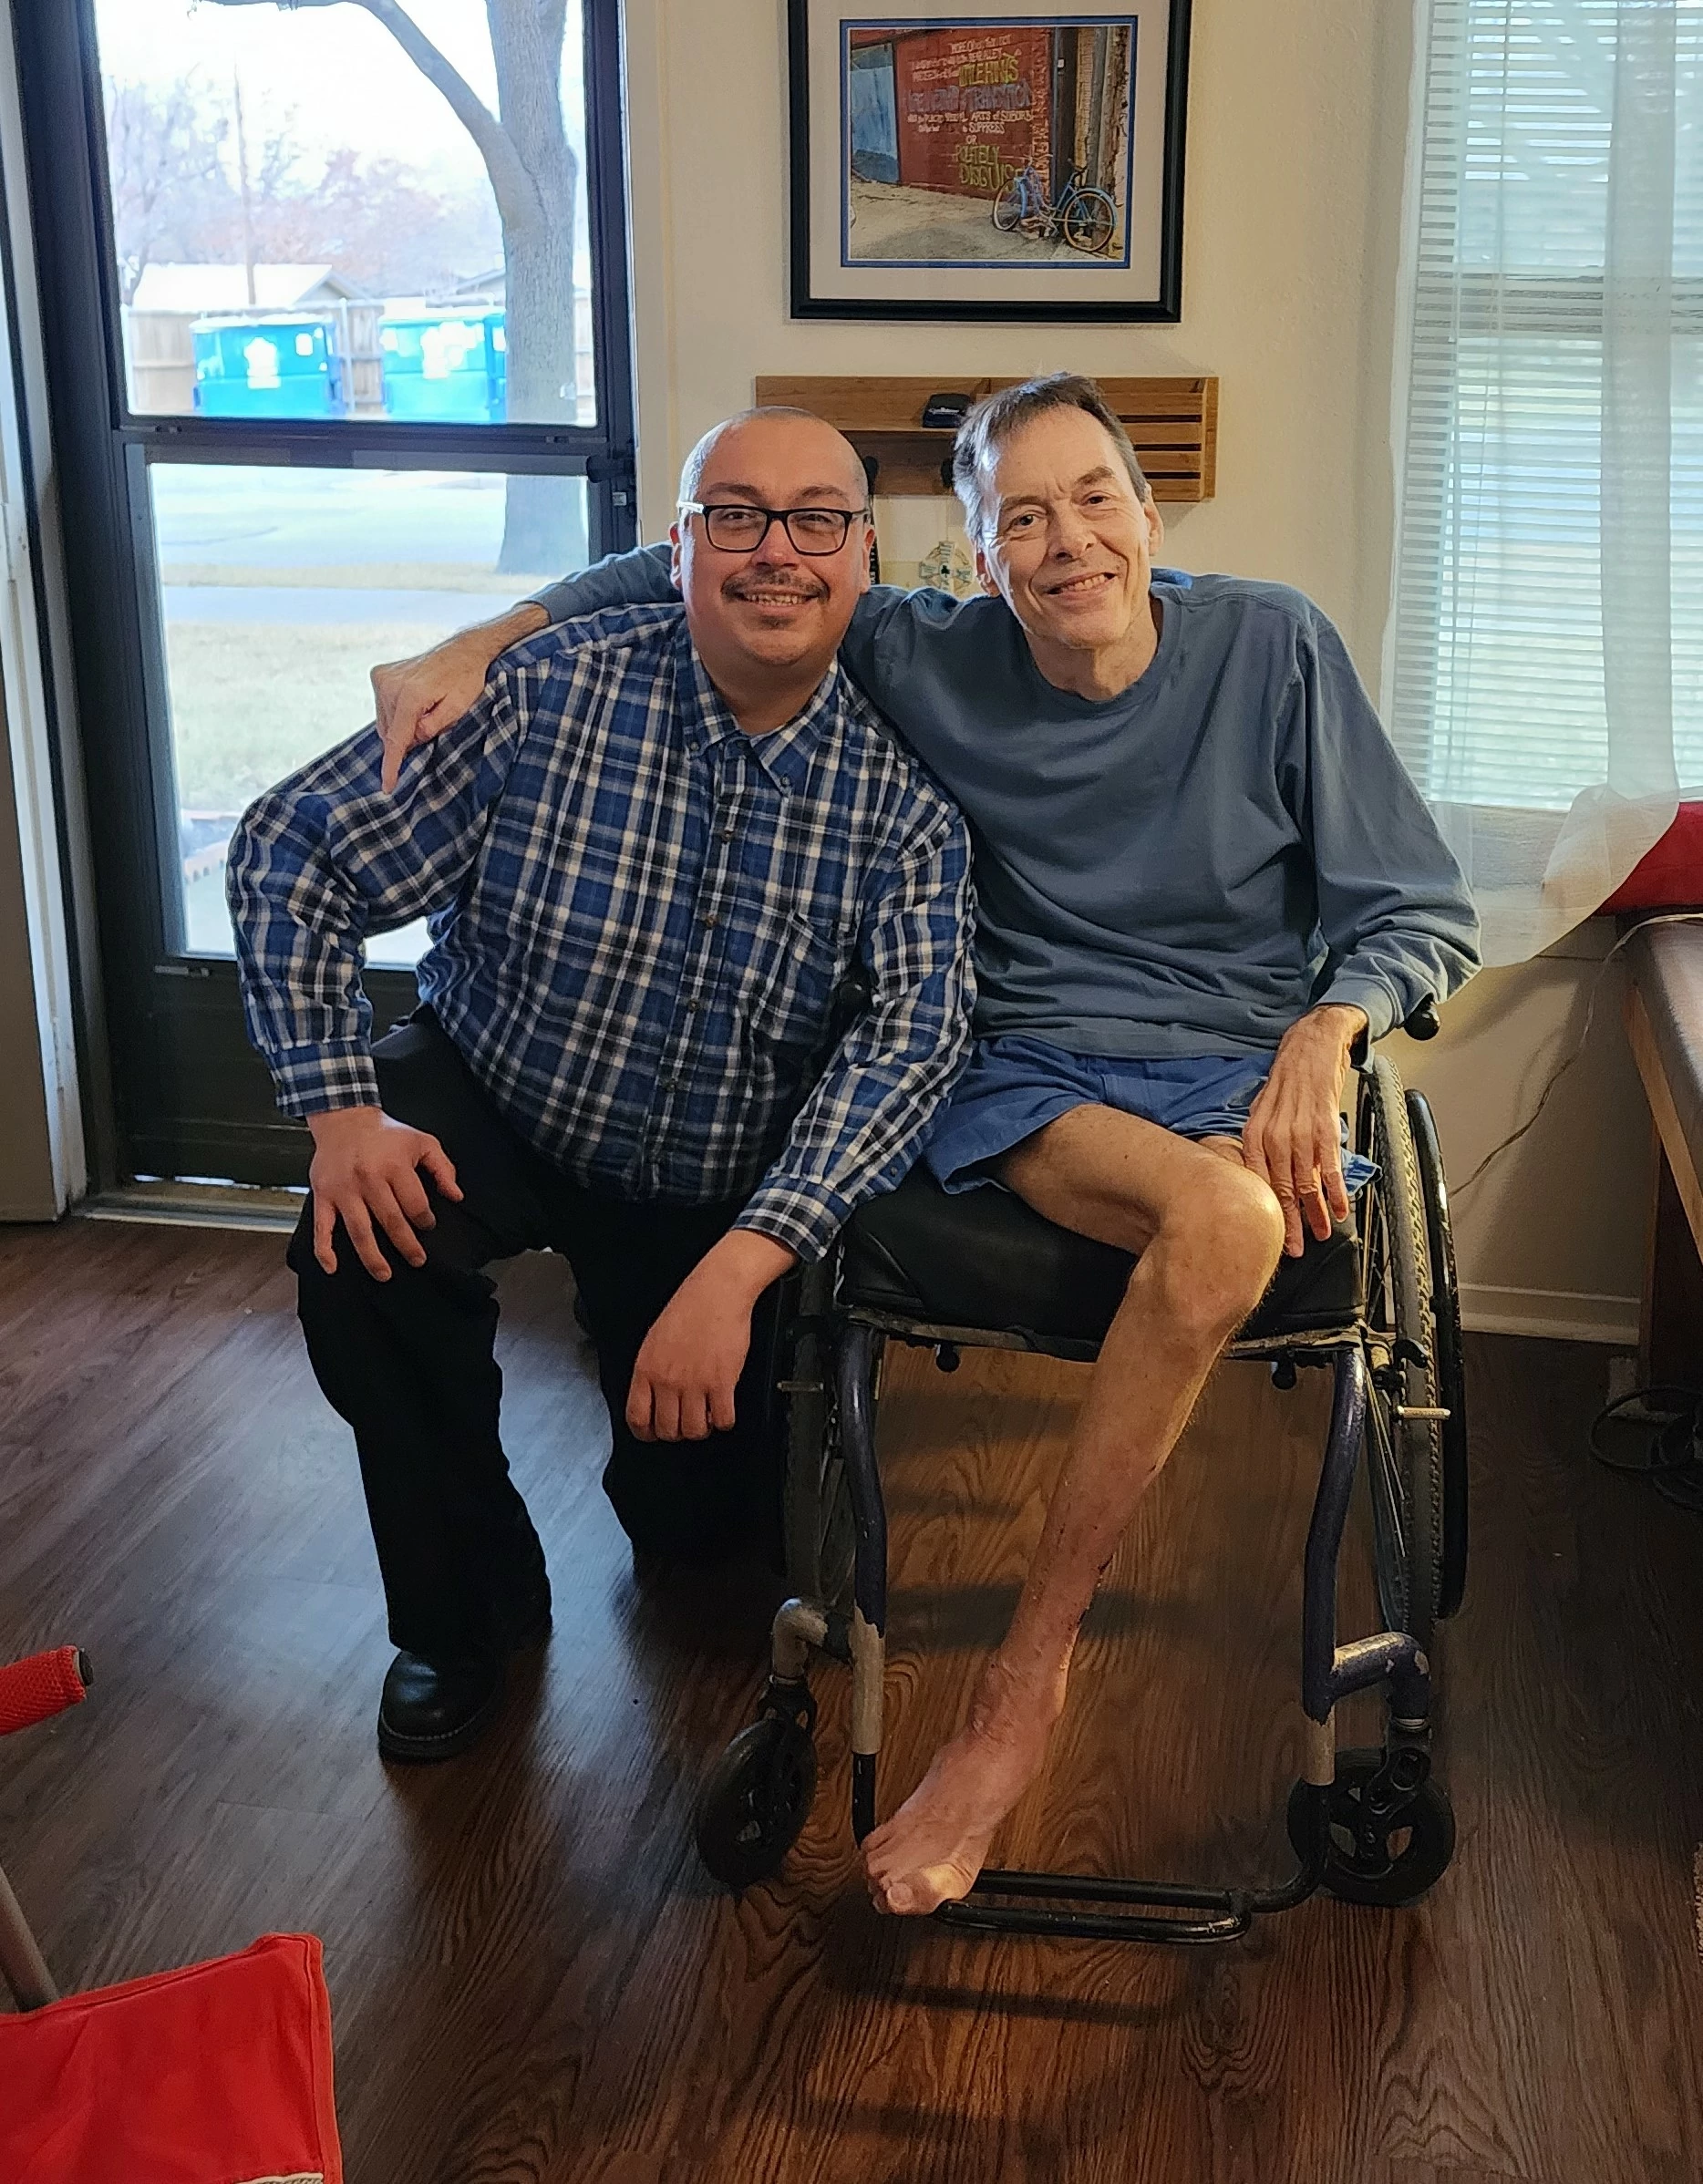 Our owner, Abel, with one of our clients. We are so lucky to have the opportunity to support those in our community and ensure they can age at home safely and successfully!